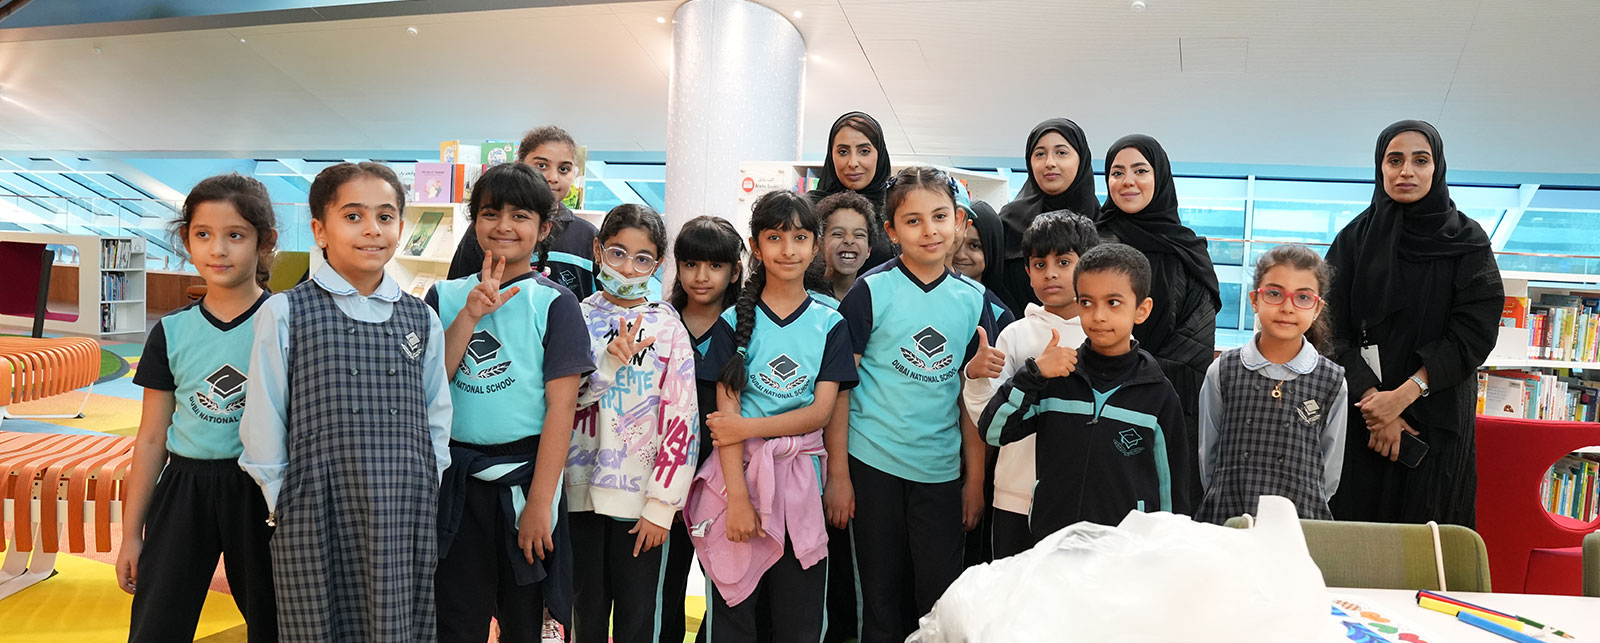 Dubai Municipality Reads with the young explorer 